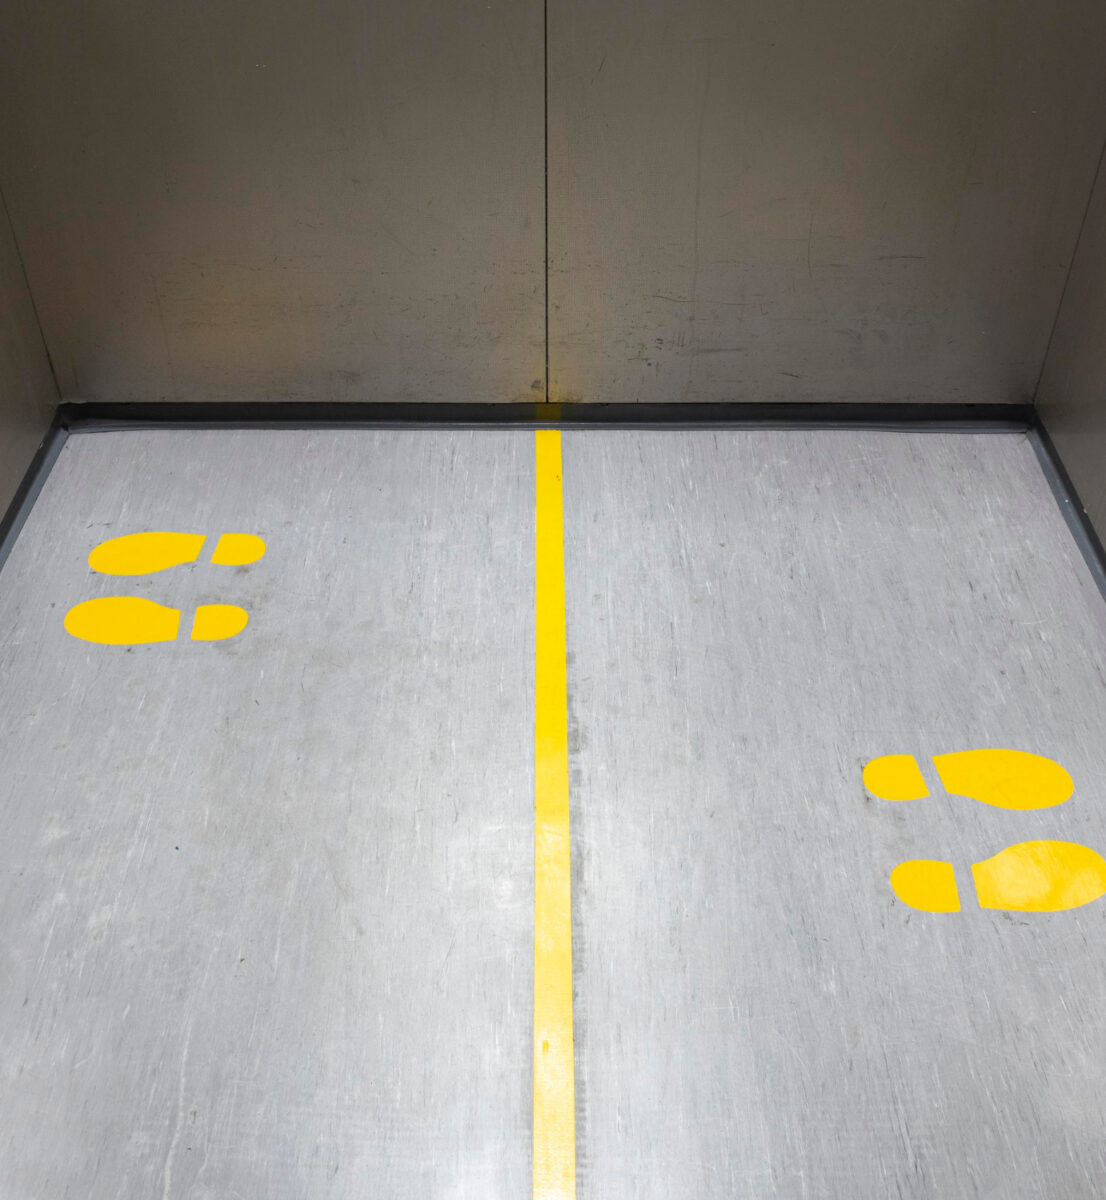 Socially Distancing Covid-19 With Yellow Footprings Inside Public Elevator